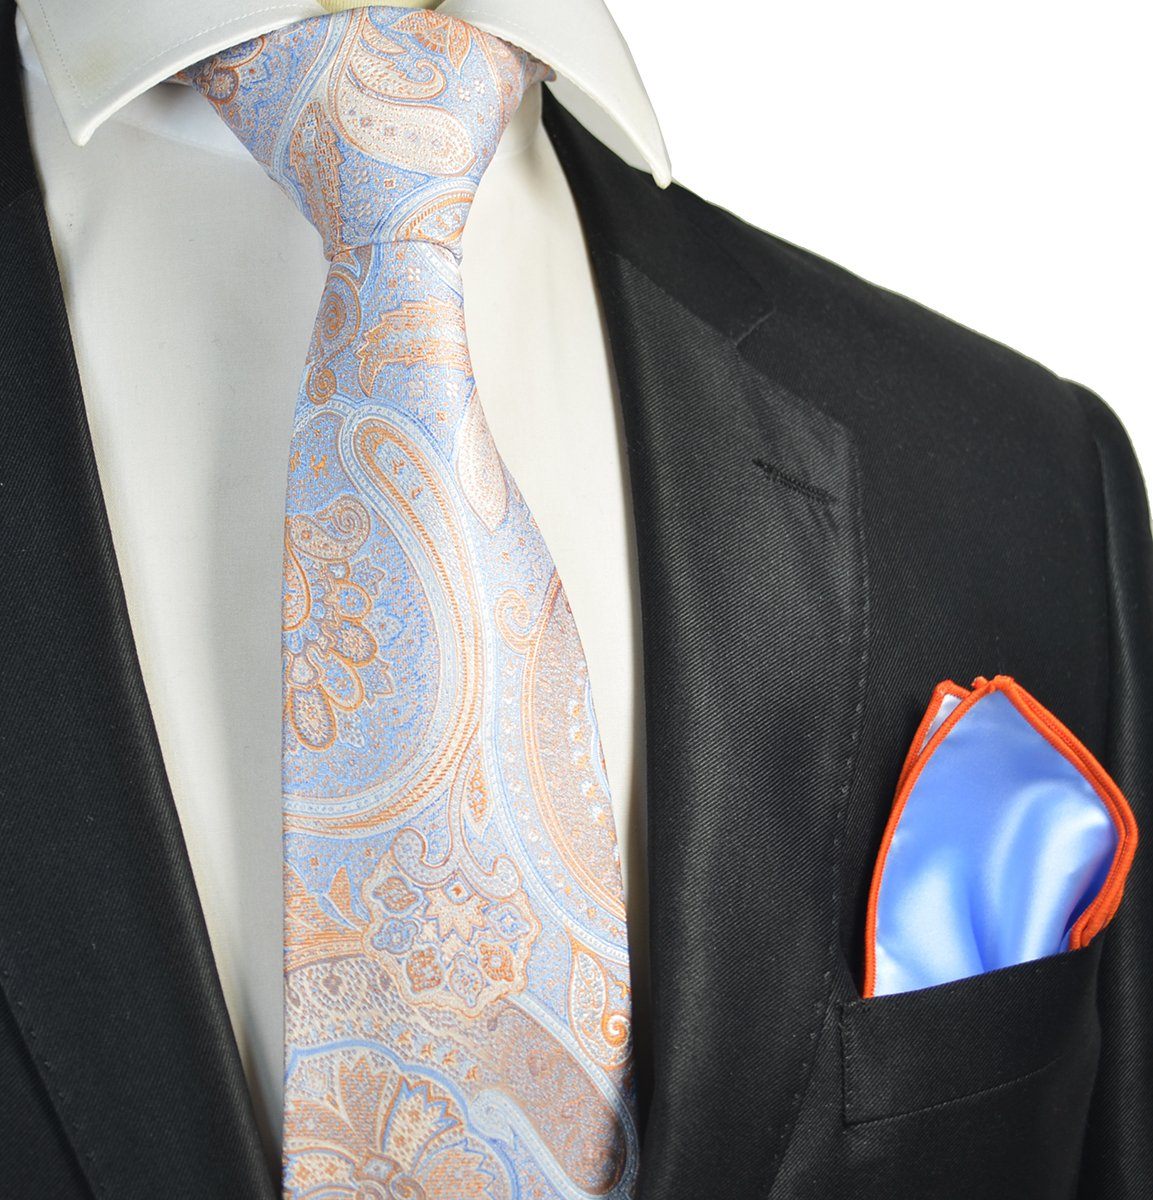 Pocket Squares and Ties